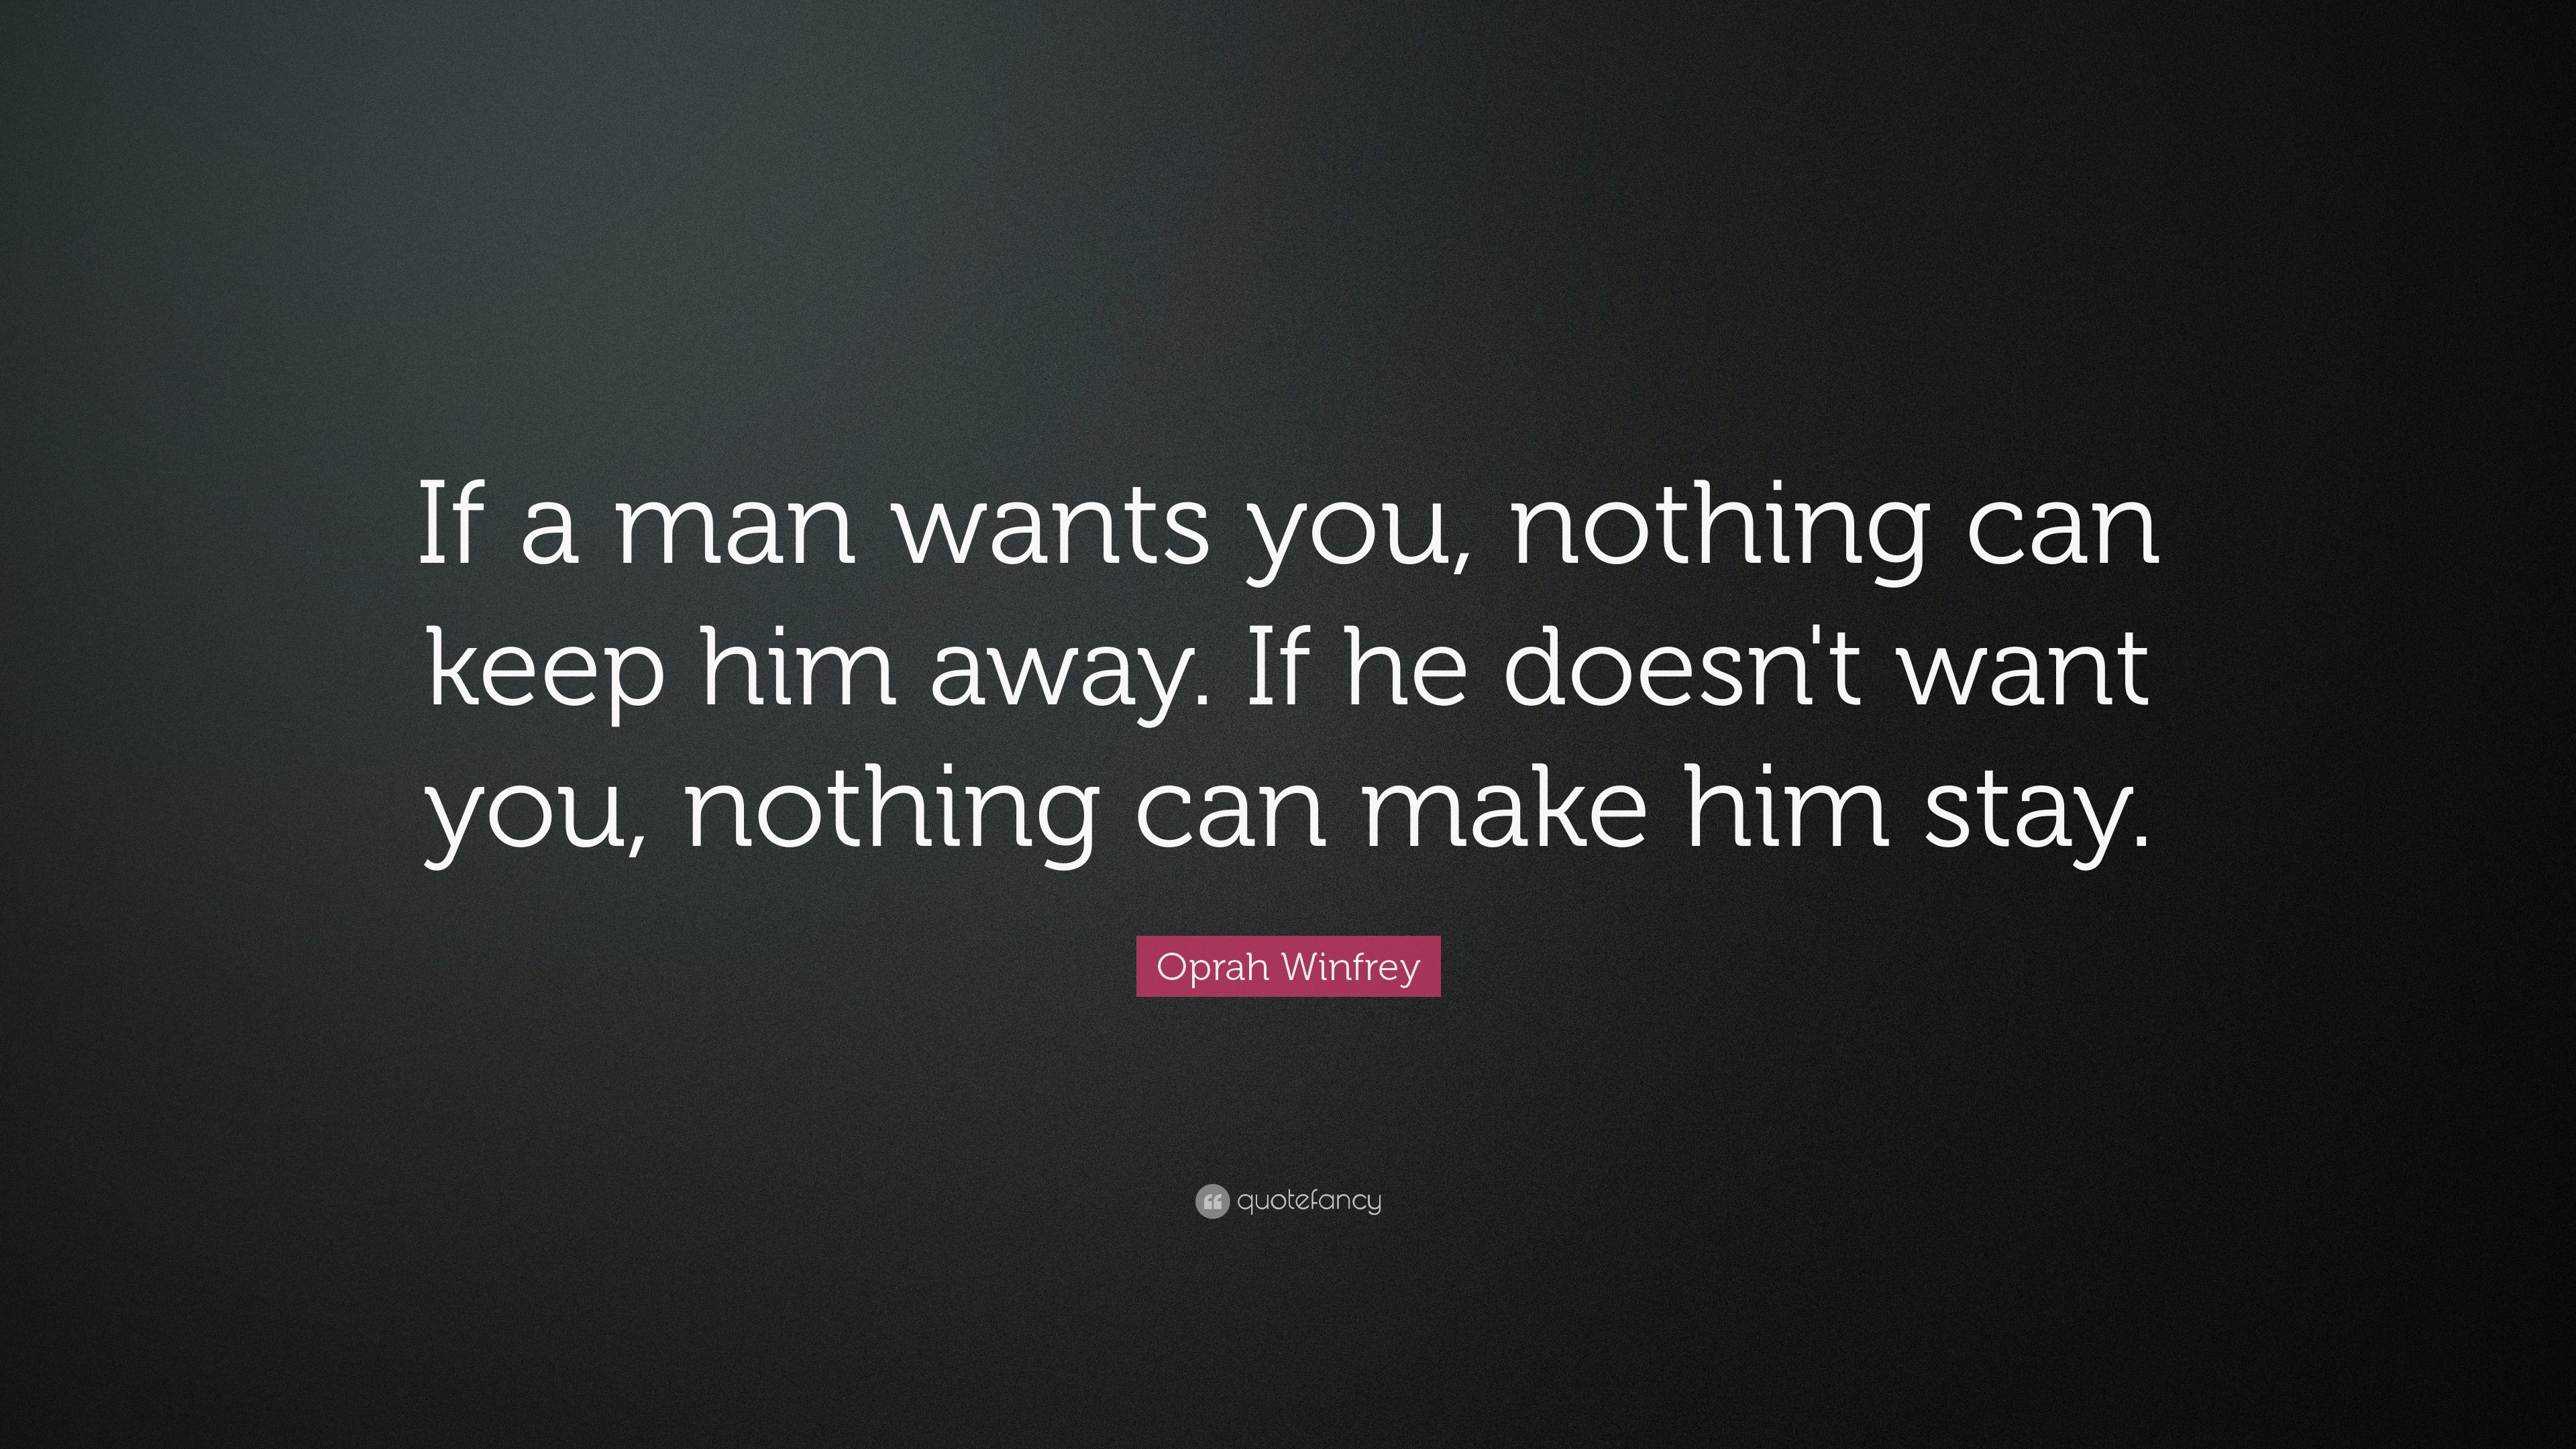 If a man wants you, nothing can keep him away. 